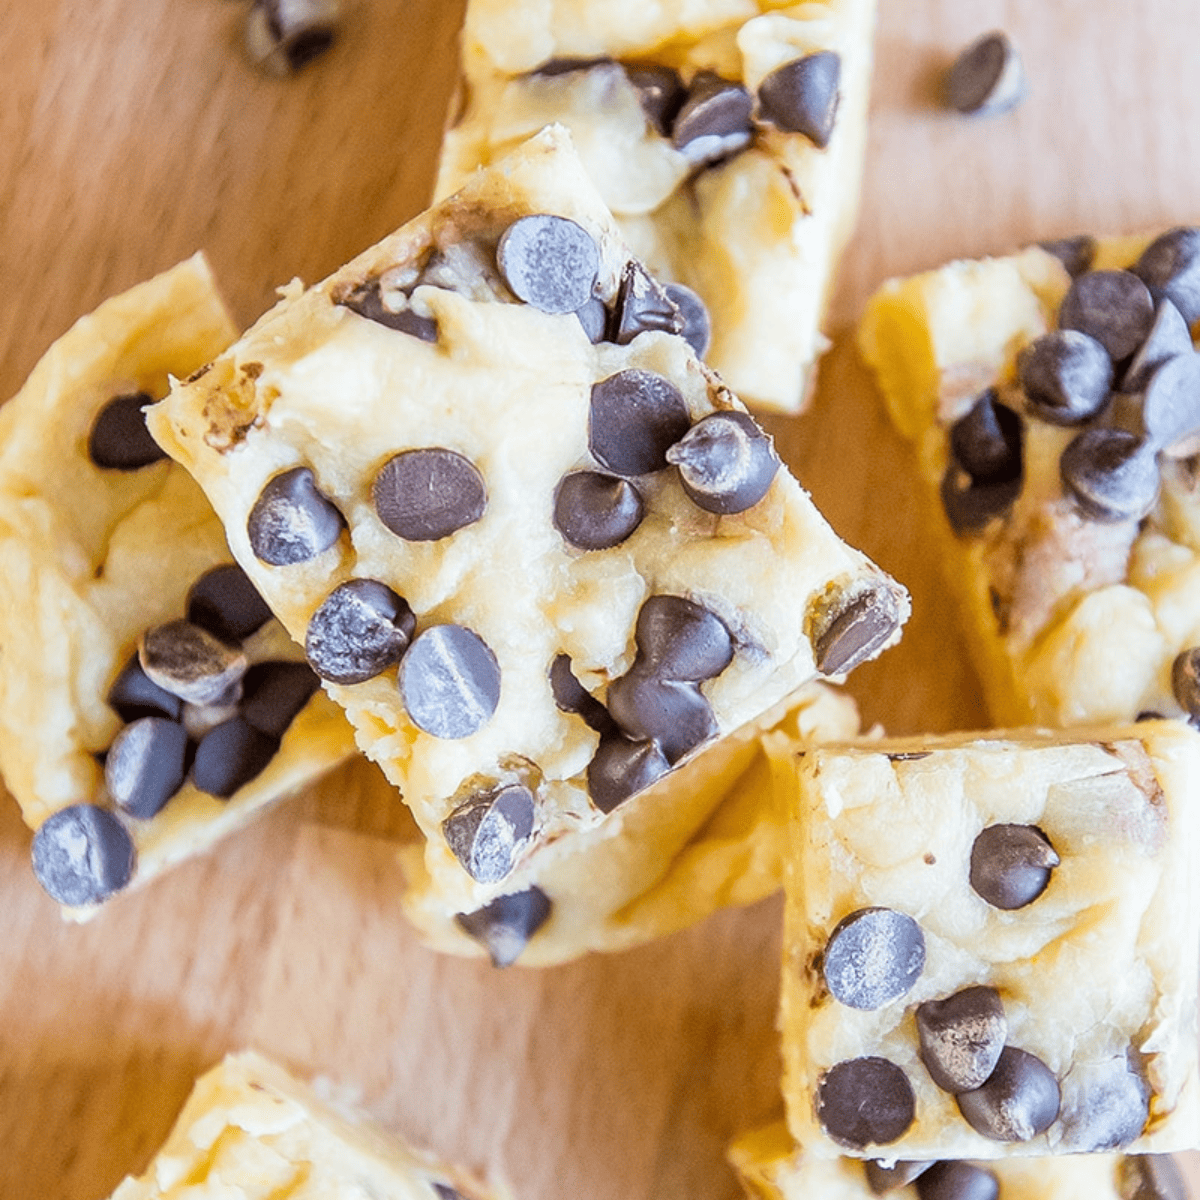 A group of brownies with chocolate chip cookie dough fudge on top.